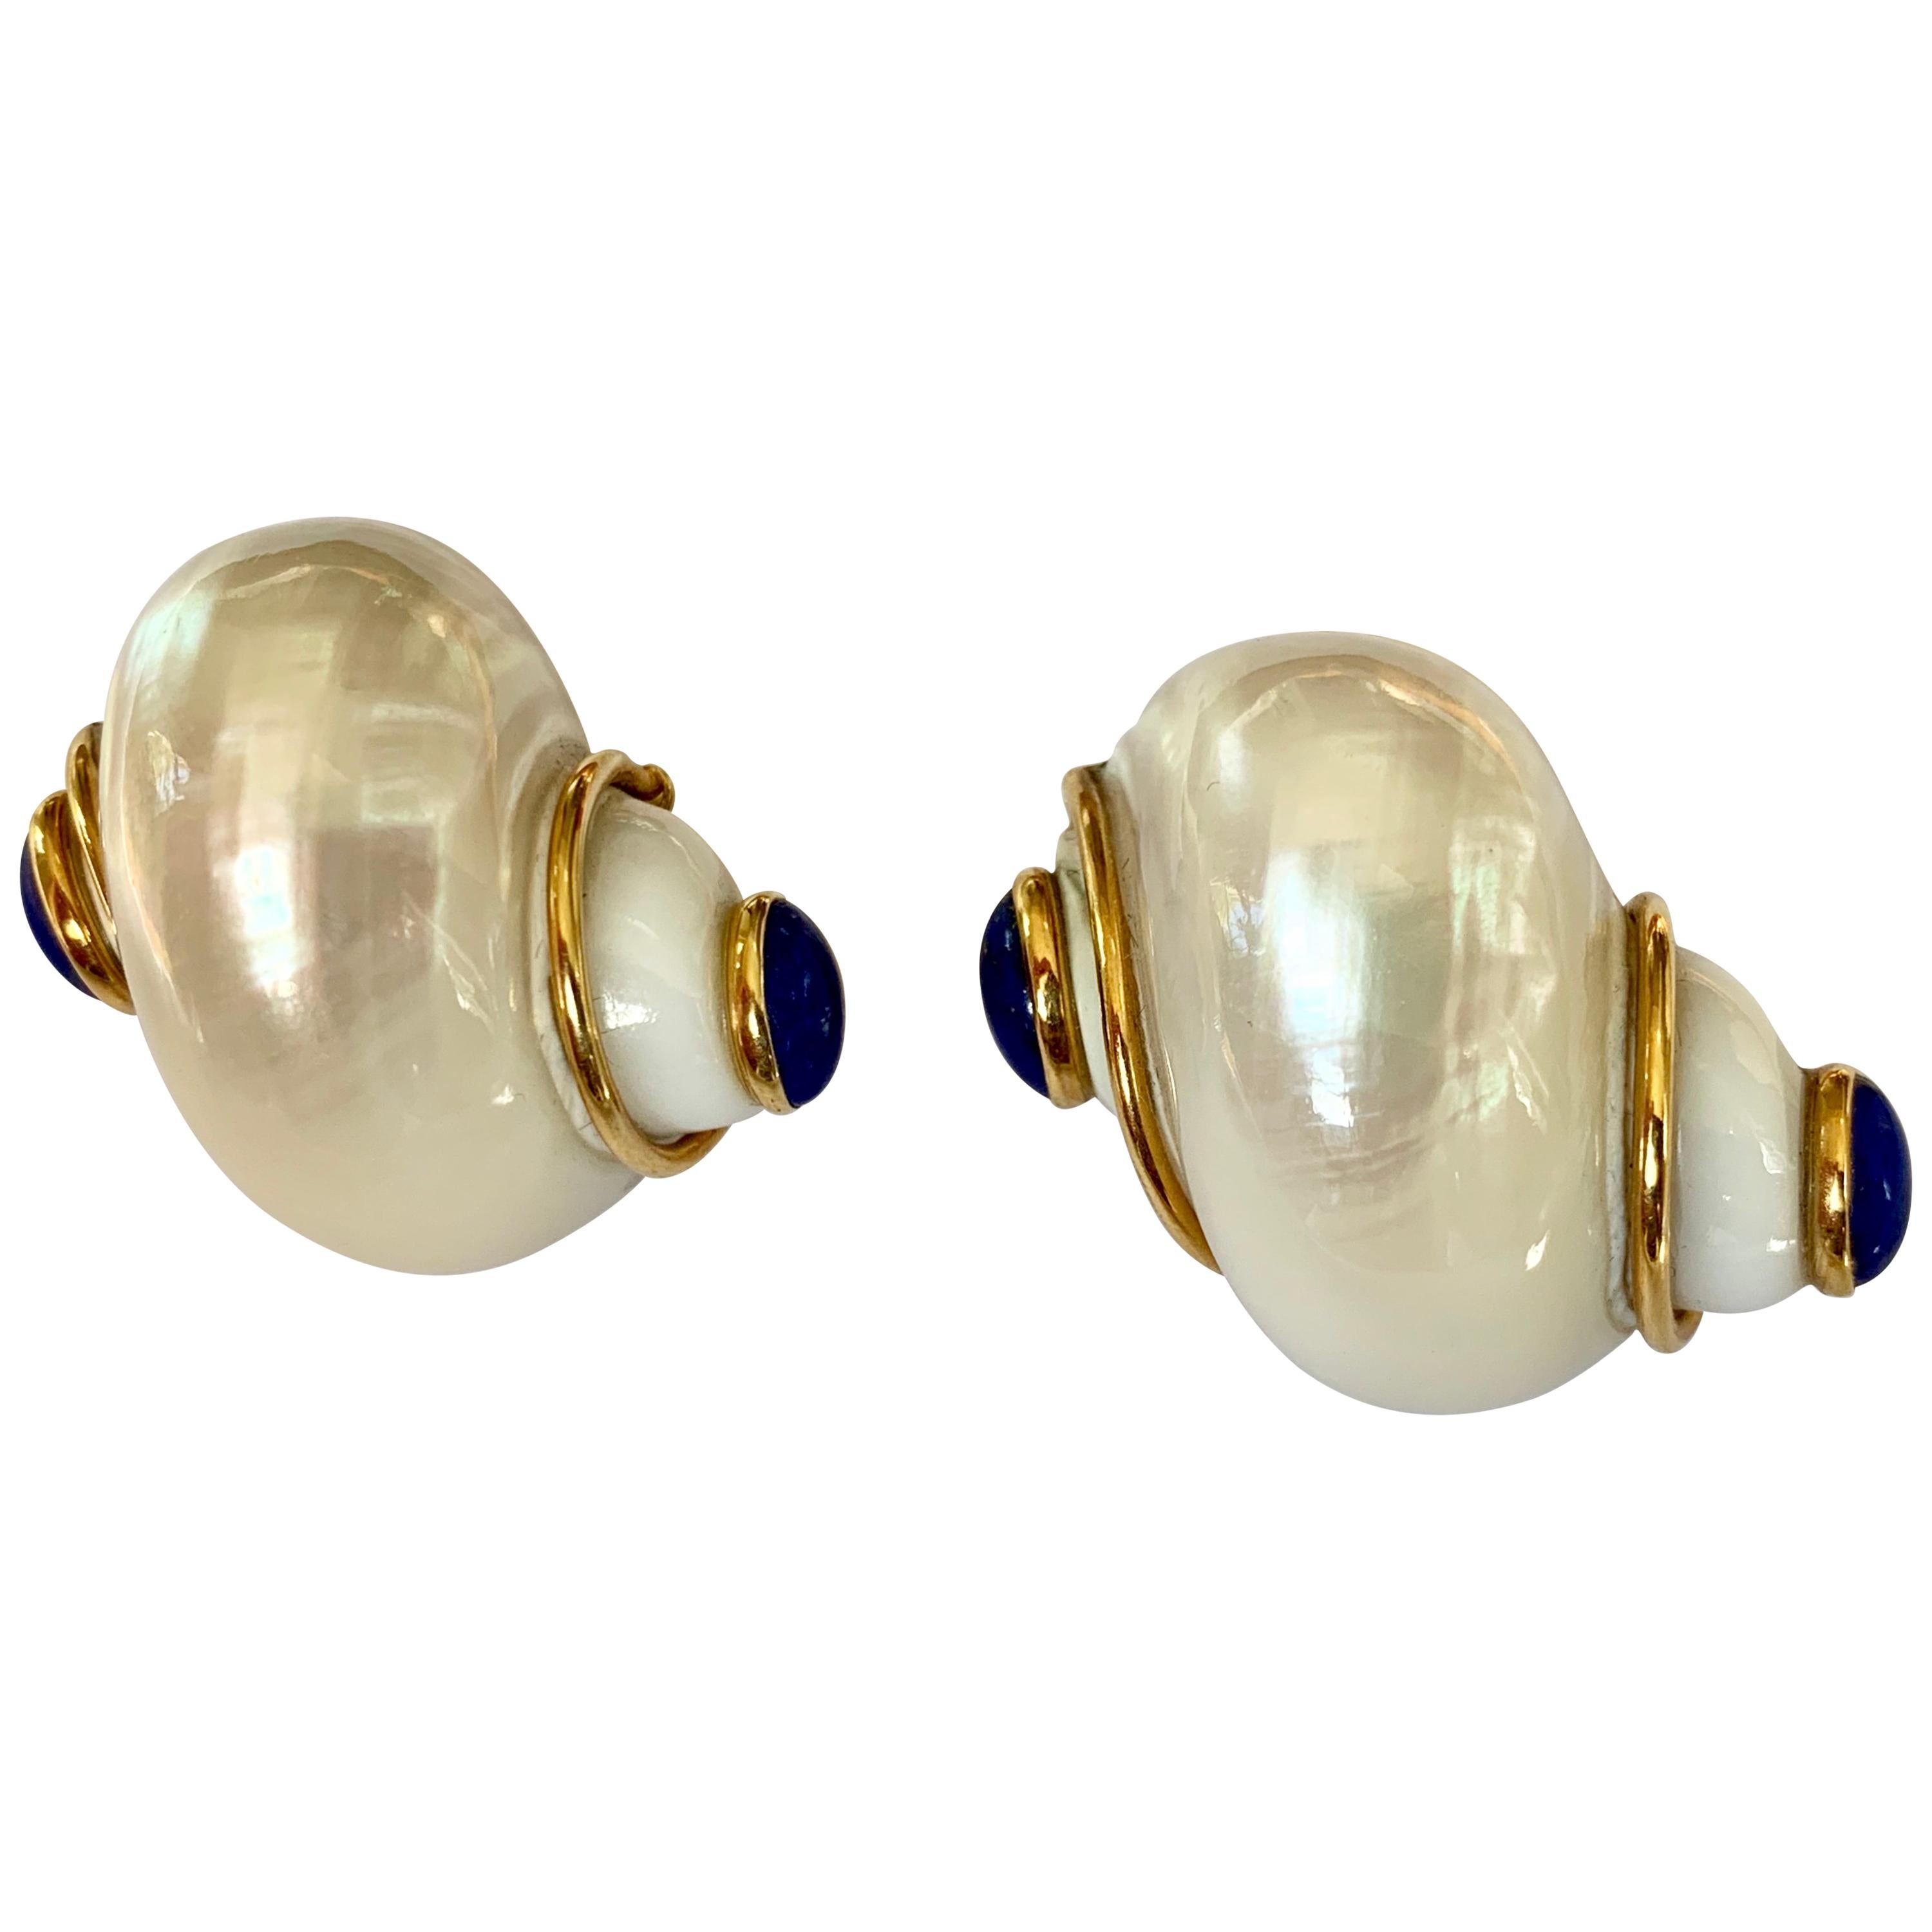 Seaman Schepps Turbo Shell and Lapis Lazuli Gold Earrings For Sale